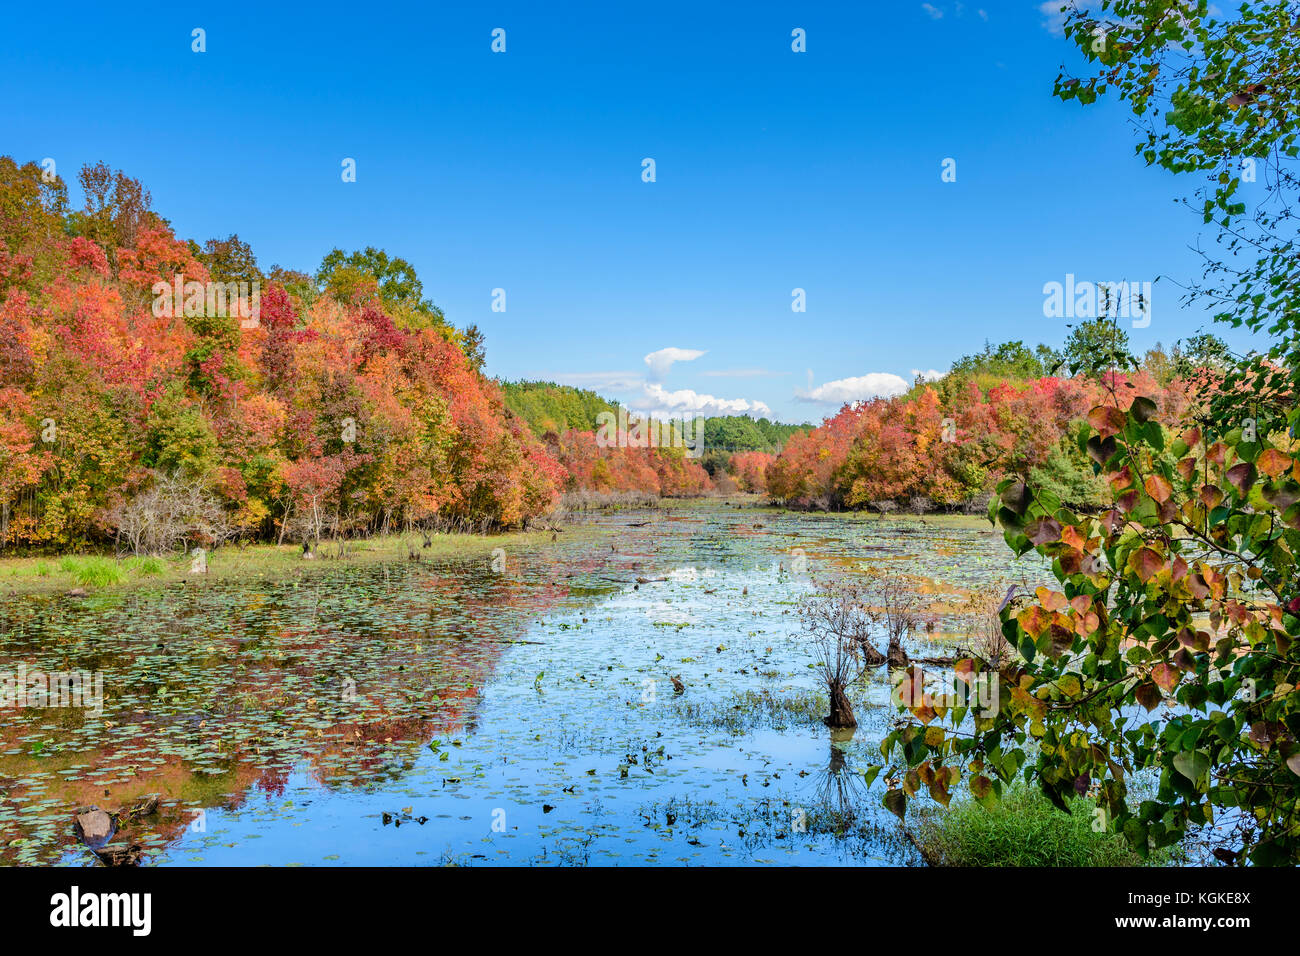 Autumn or Fall colors on a small lake in south central Alabama, USA. Stock Photo